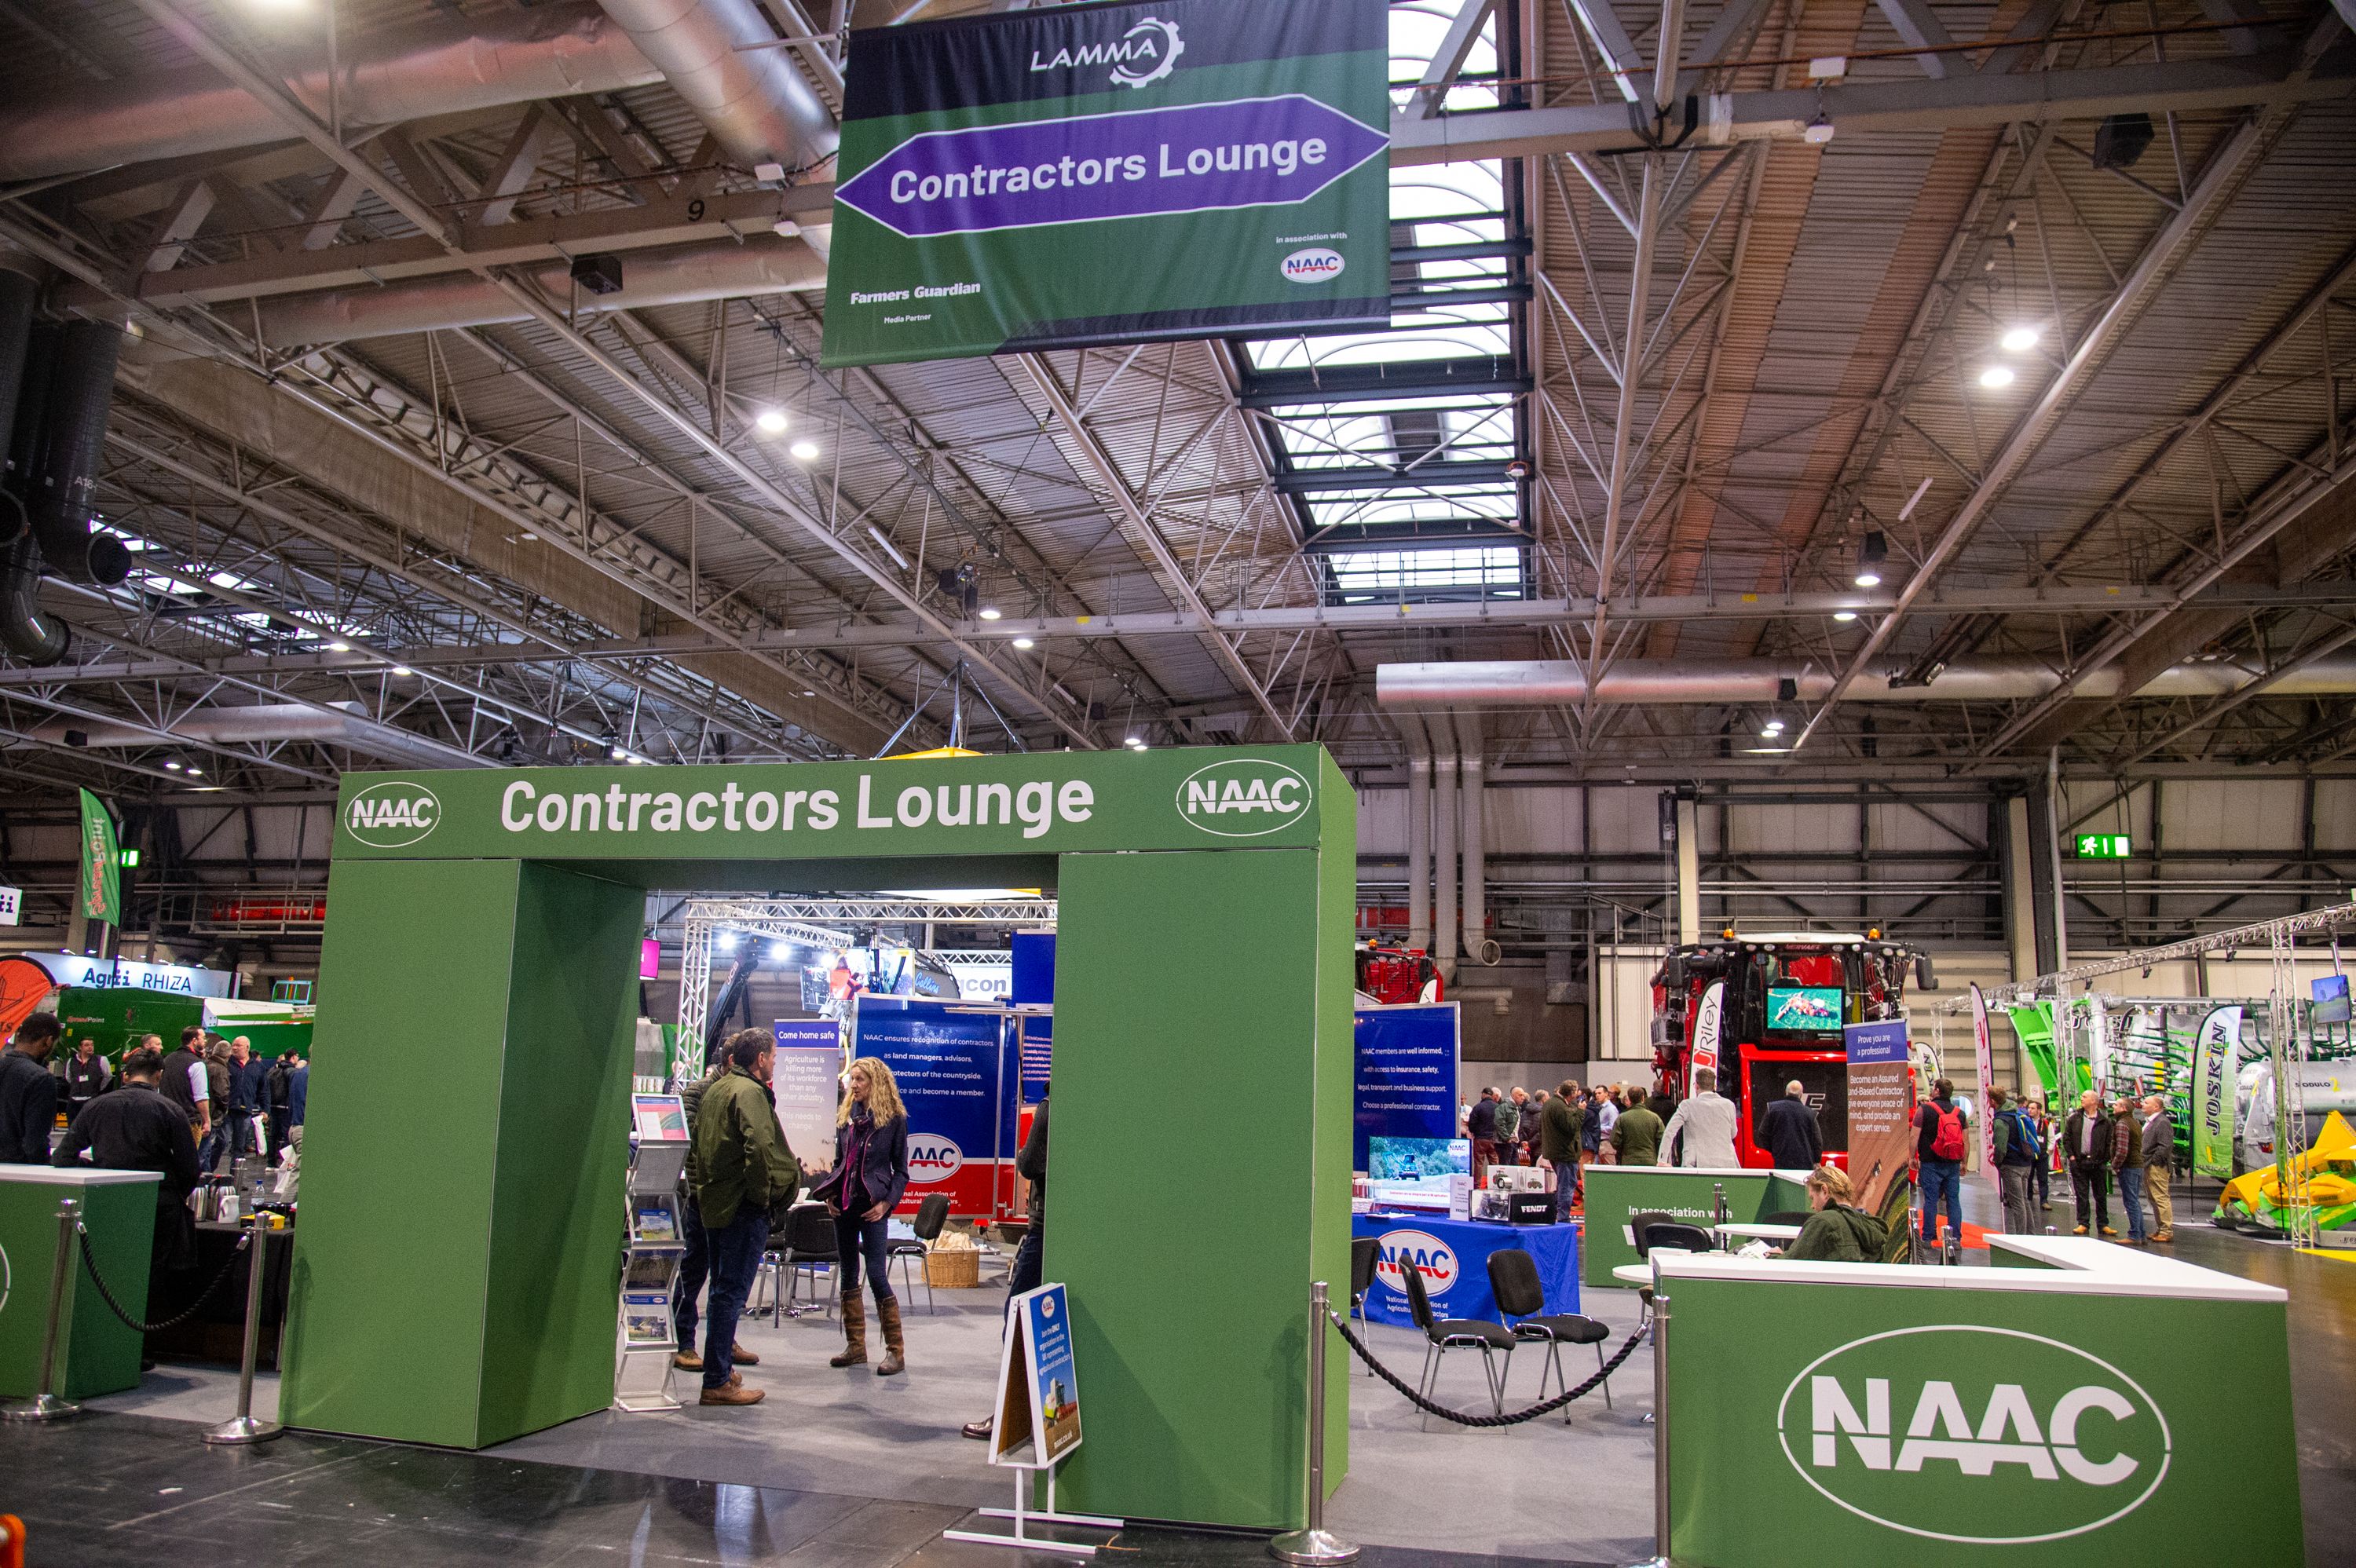 The NAAC Contractors Lounge 